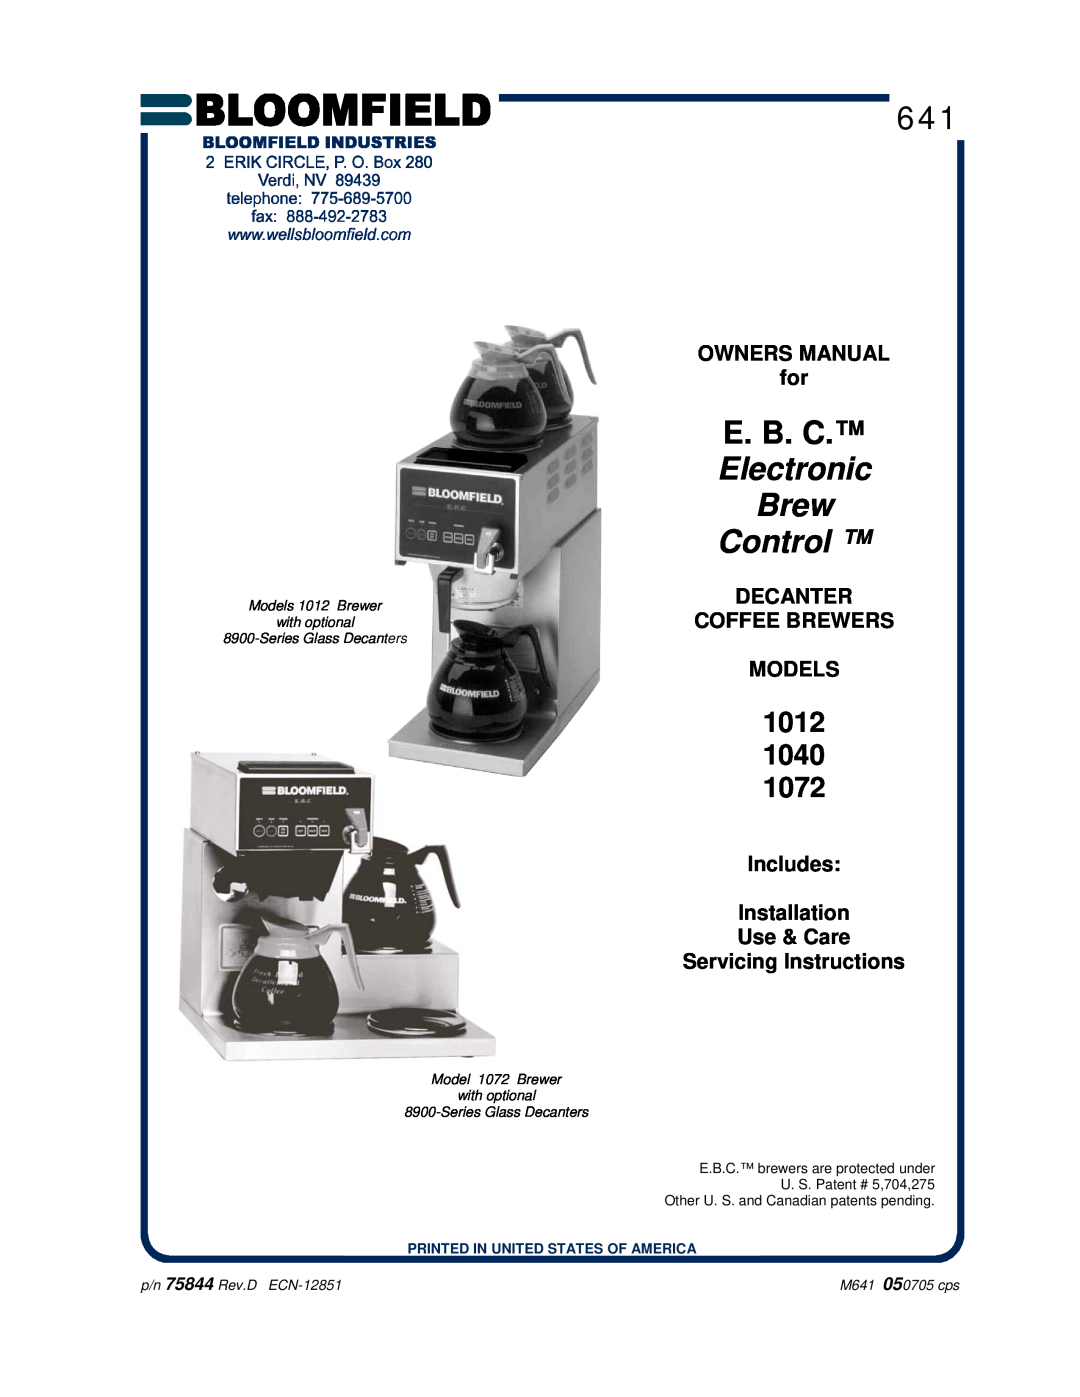 Bloomfield 1040, 1012 owner manual OWNERS MANUAL for, Decanter Coffee Brewers Models, E. B. C, Electronic Brew Control 